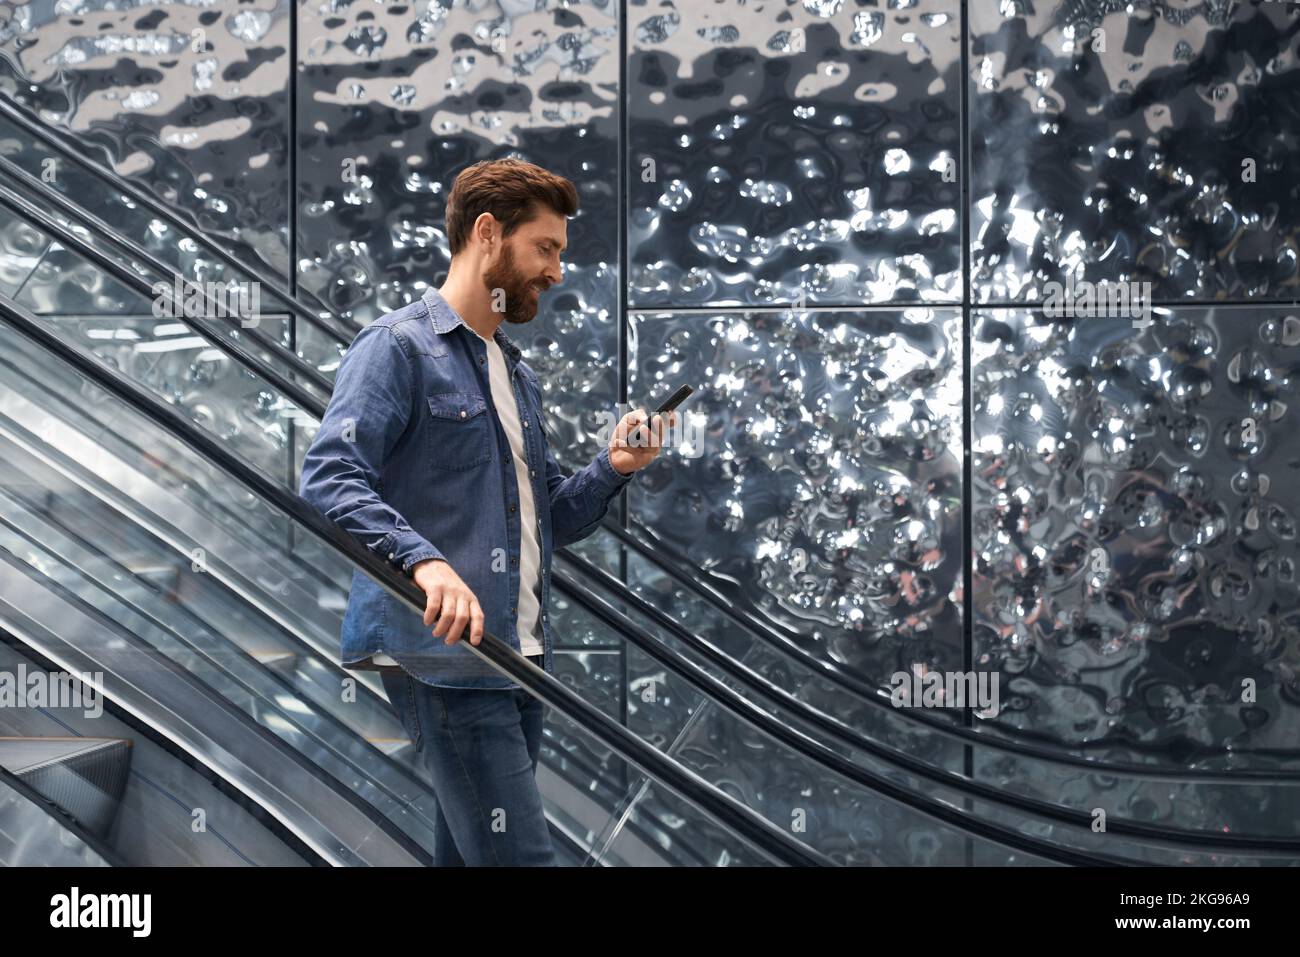 Smiling handsome man using smartphone, while going down on escalator of shopping mall. Side view of bearded male in denim jacket standing on moving st Stock Photo